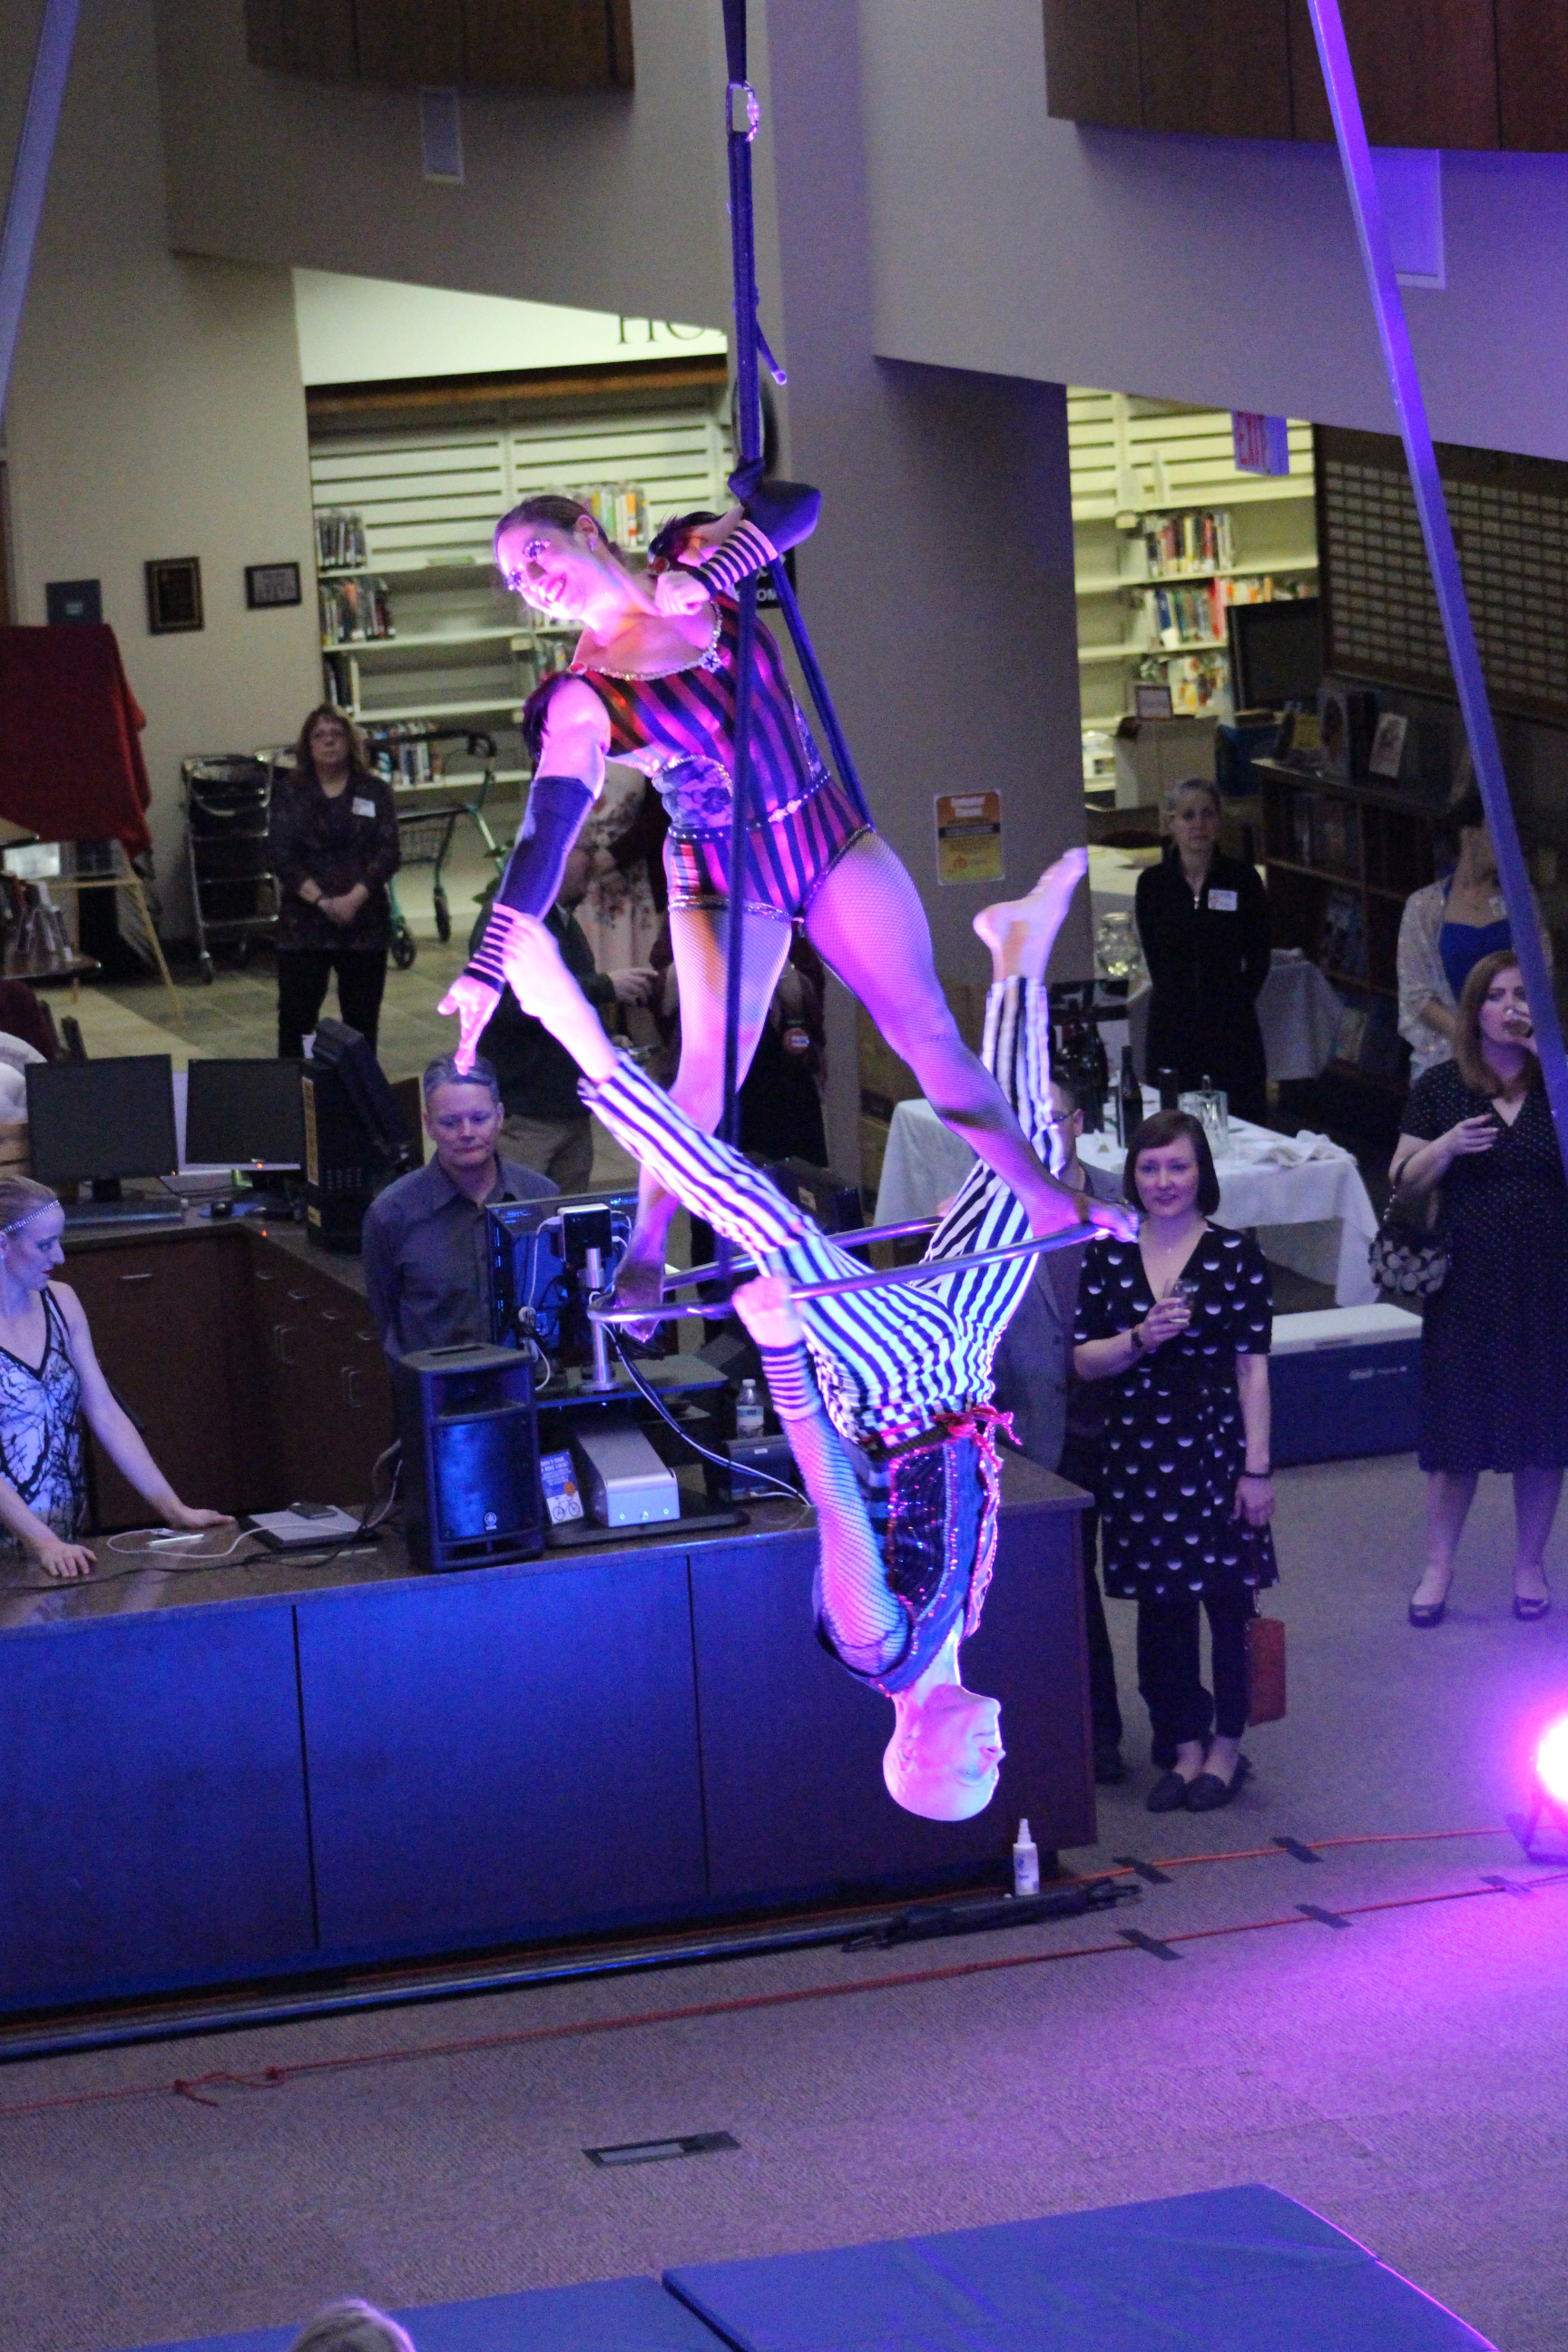 Two aerial performers suspended on ropes in front of crowd